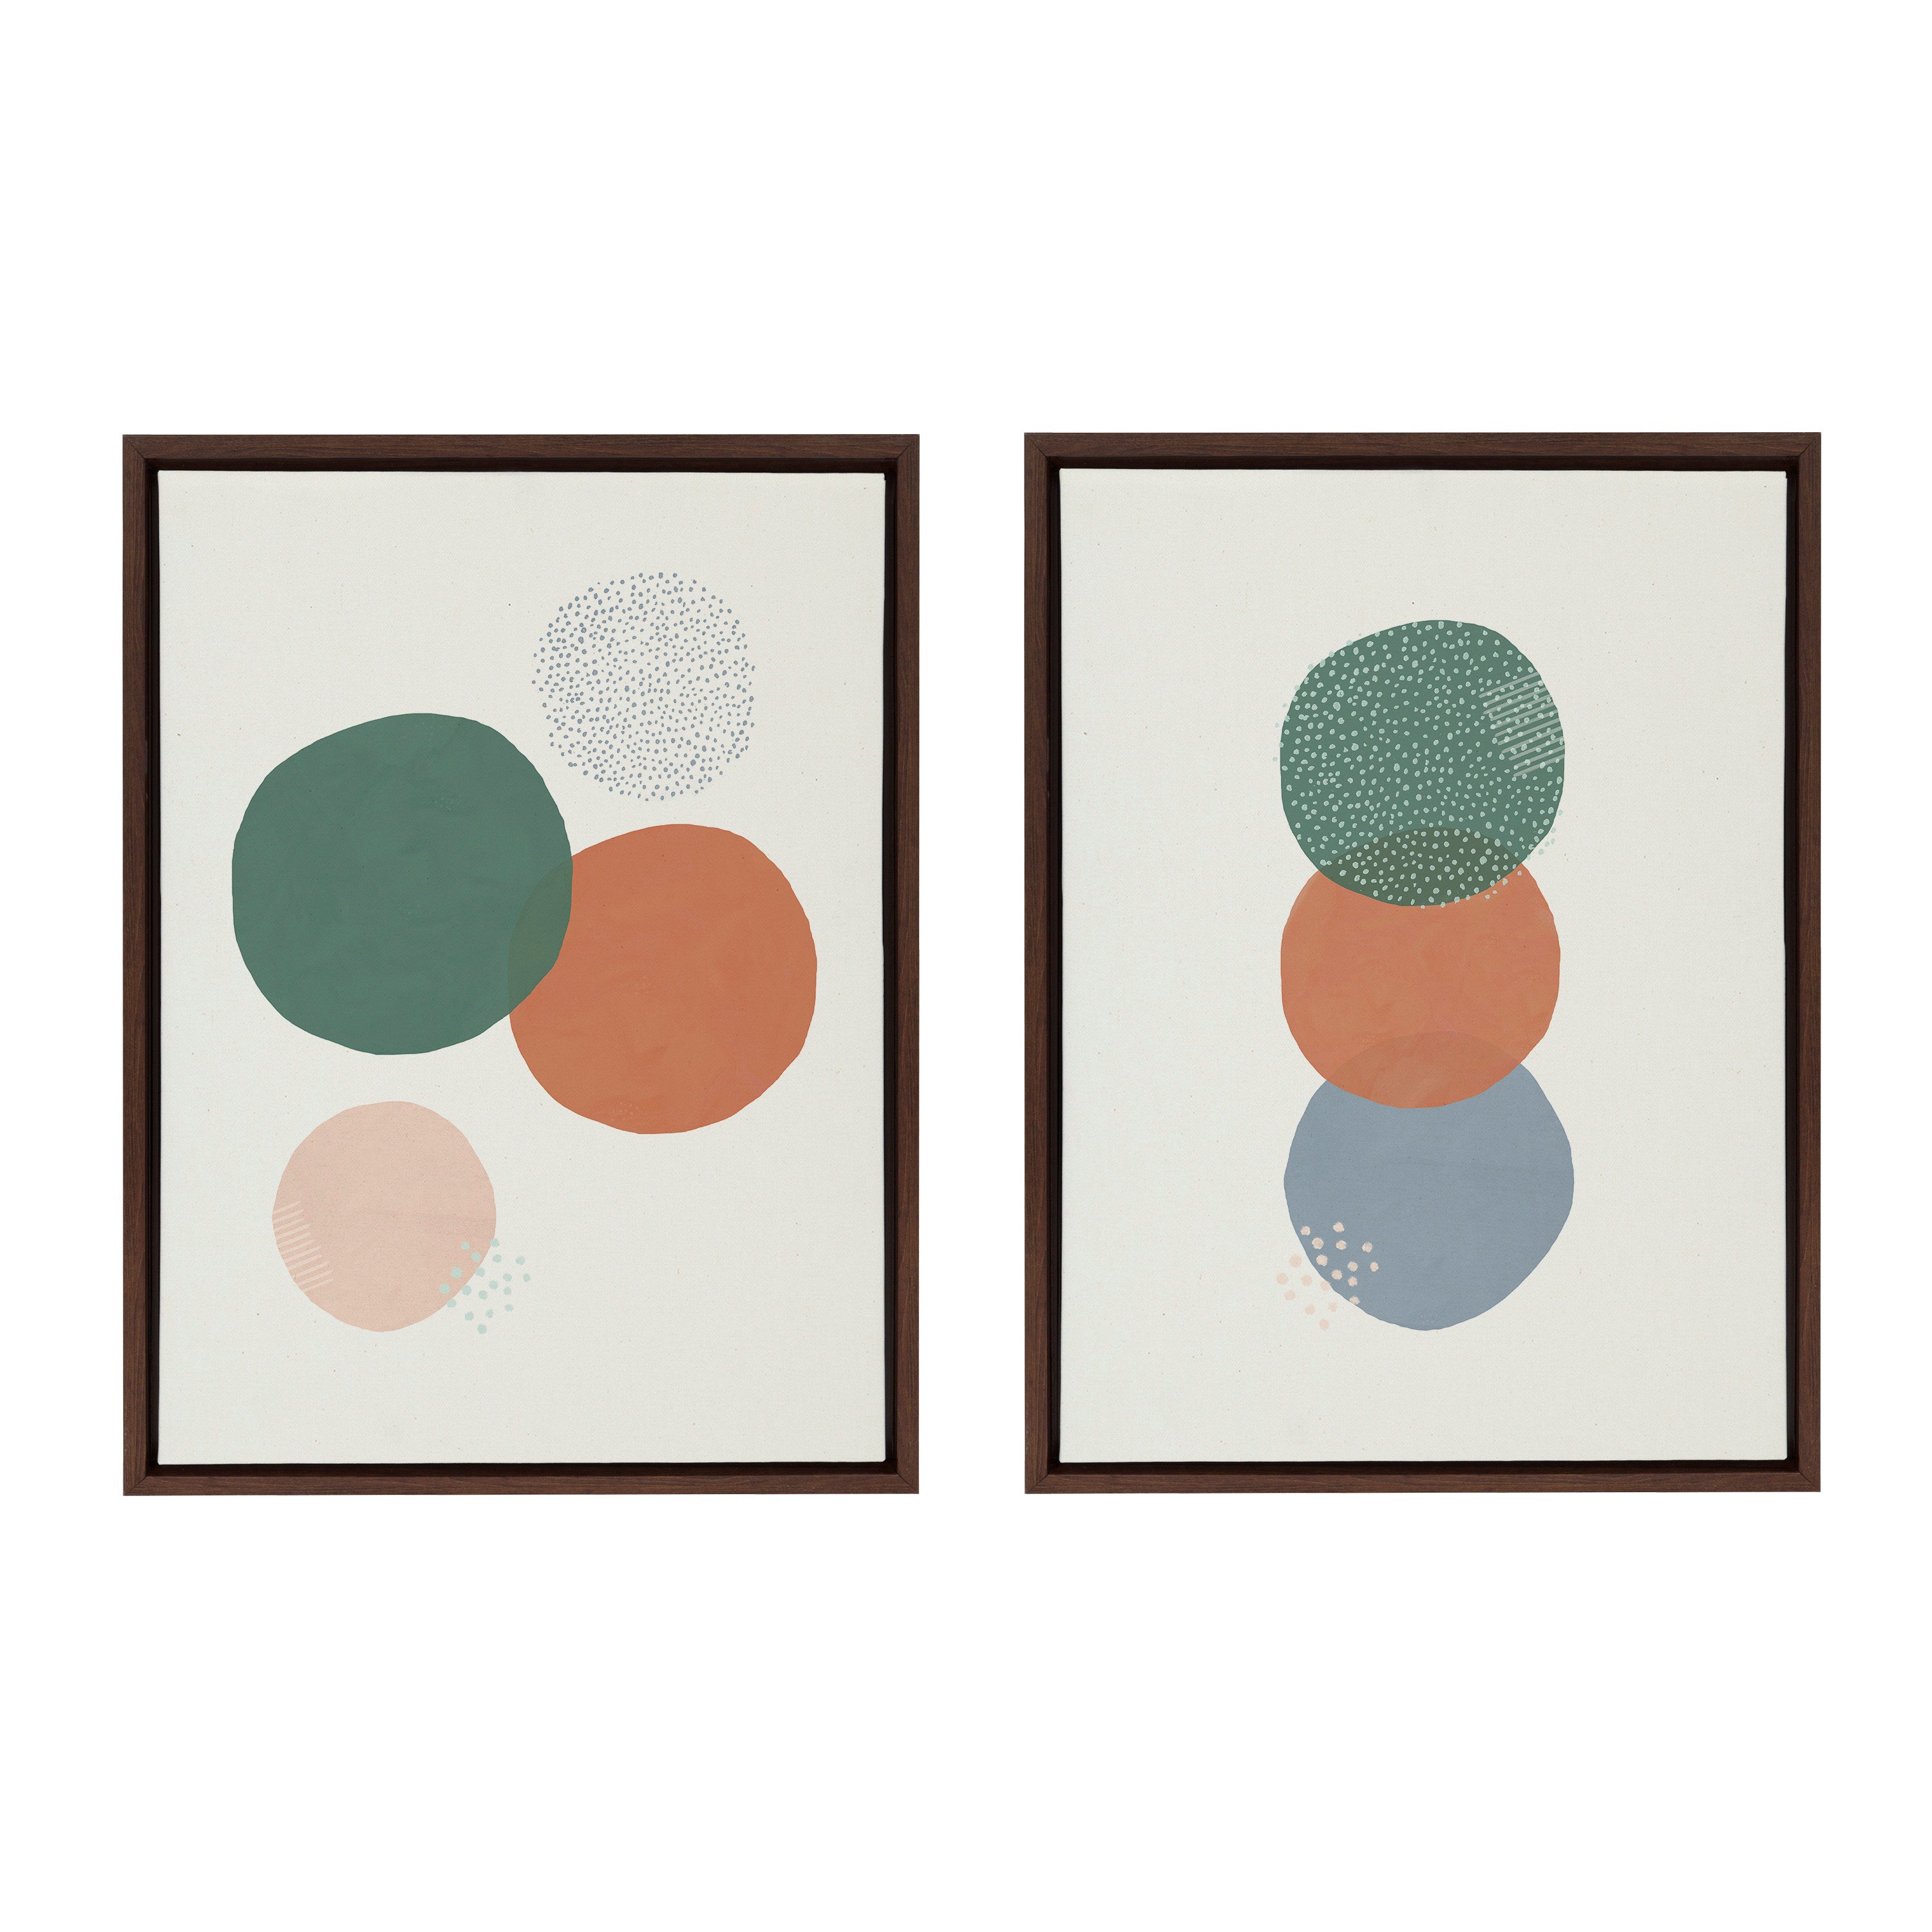 Sylvie Abstract Soft Circles Part 1 and 2 Framed Canvas Set by Lauradidthis